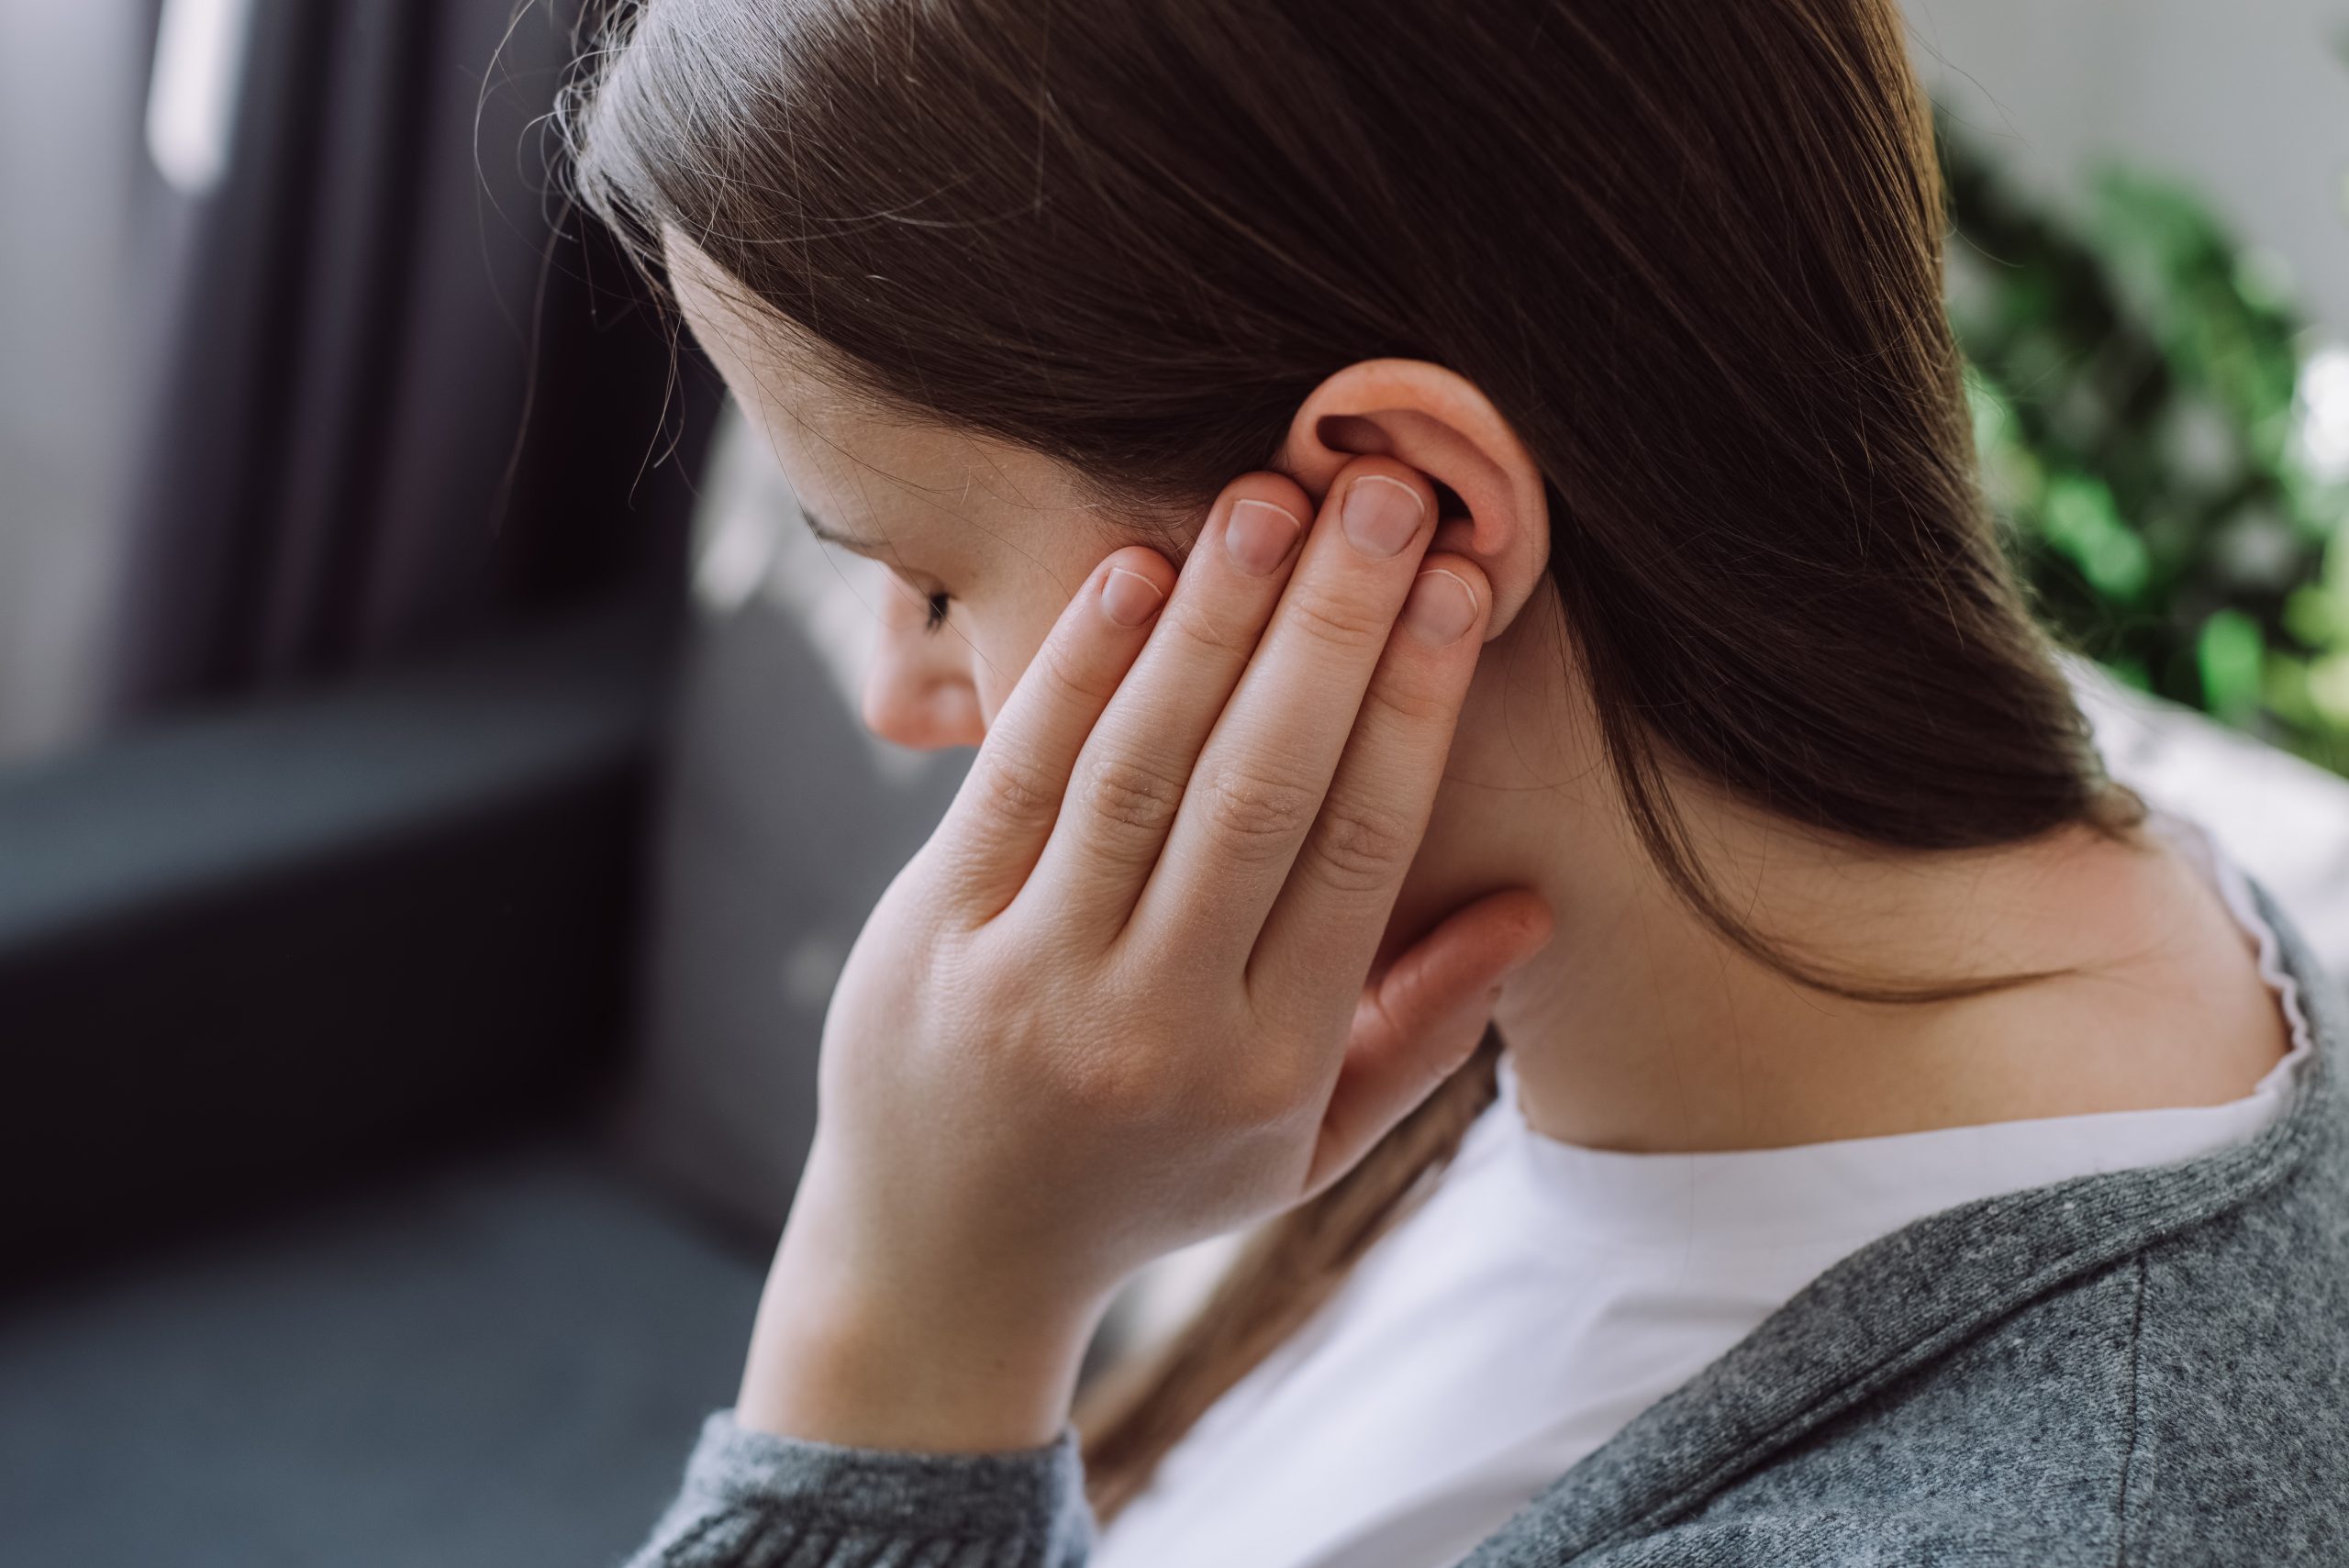 Common hearing problems and their symptoms